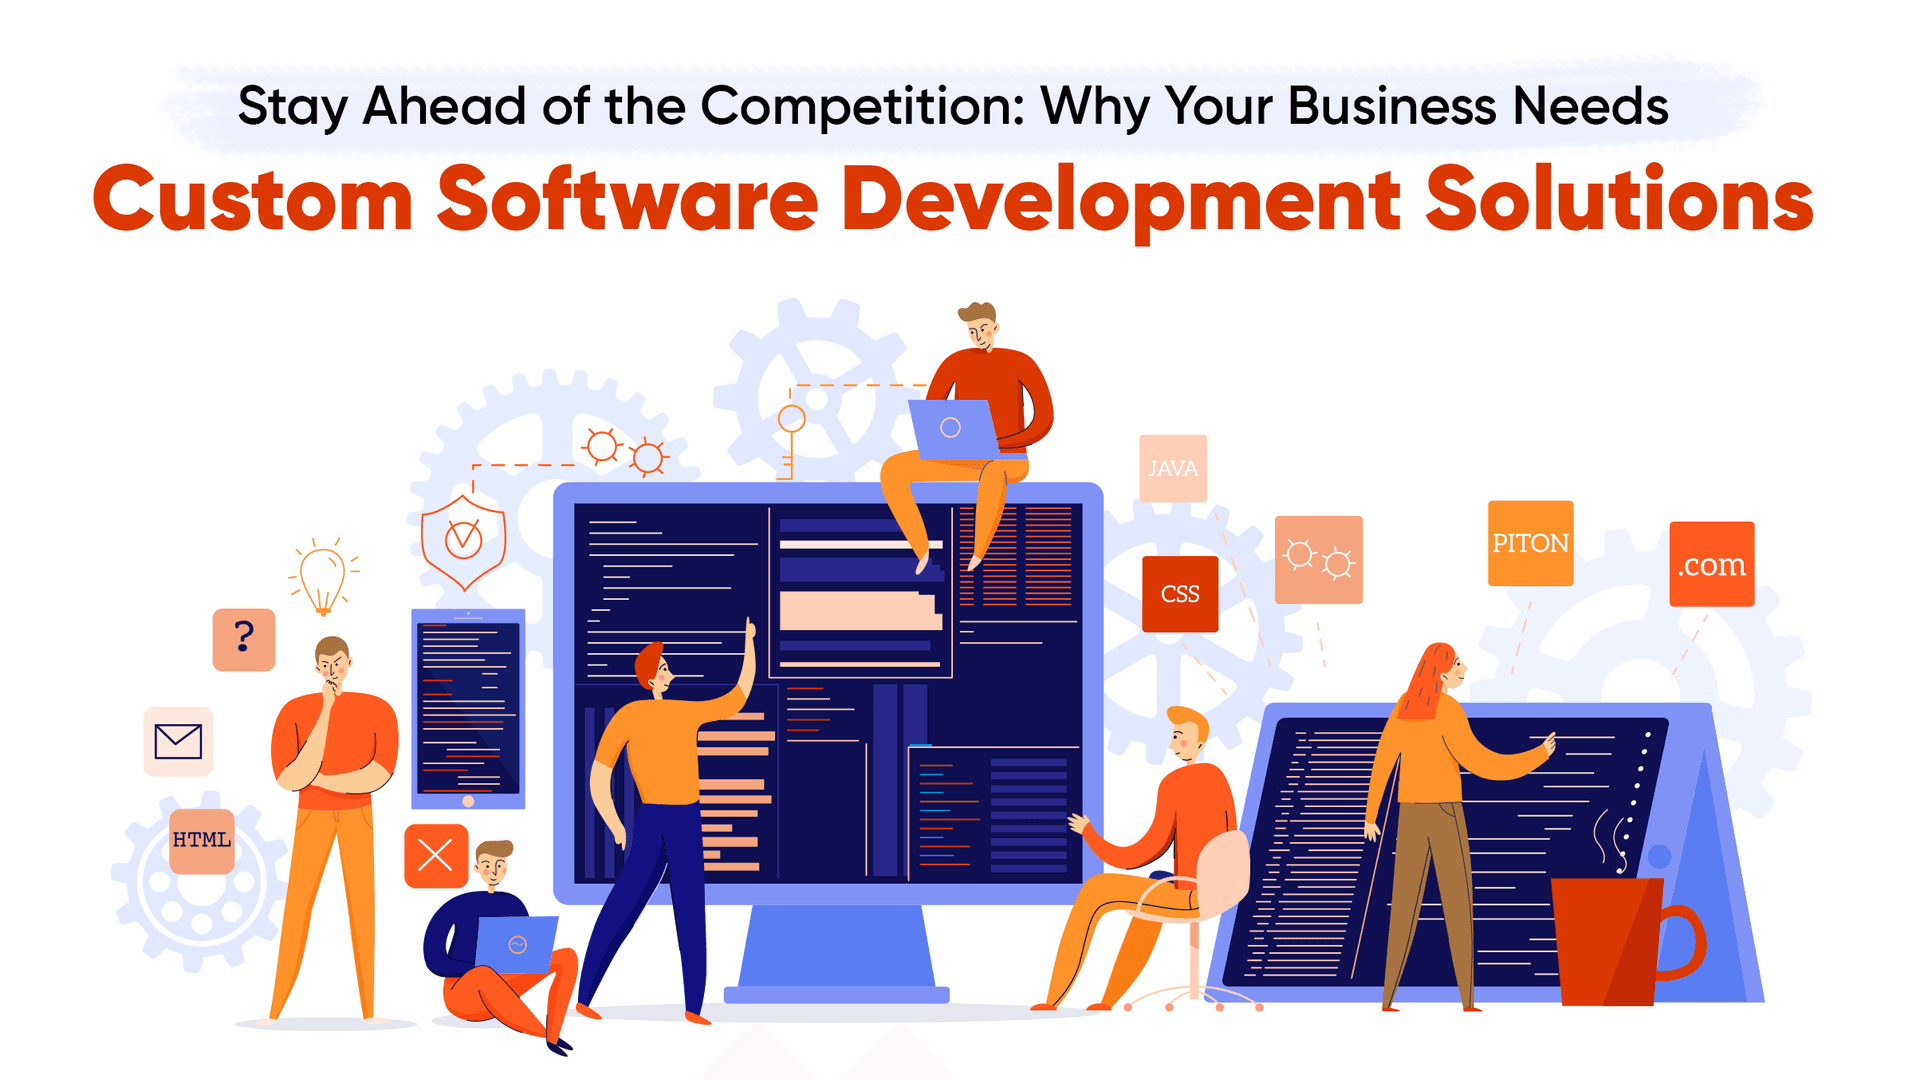 Stay Ahead of the Competition: Why Your Business Needs Custom Software Development Solutions